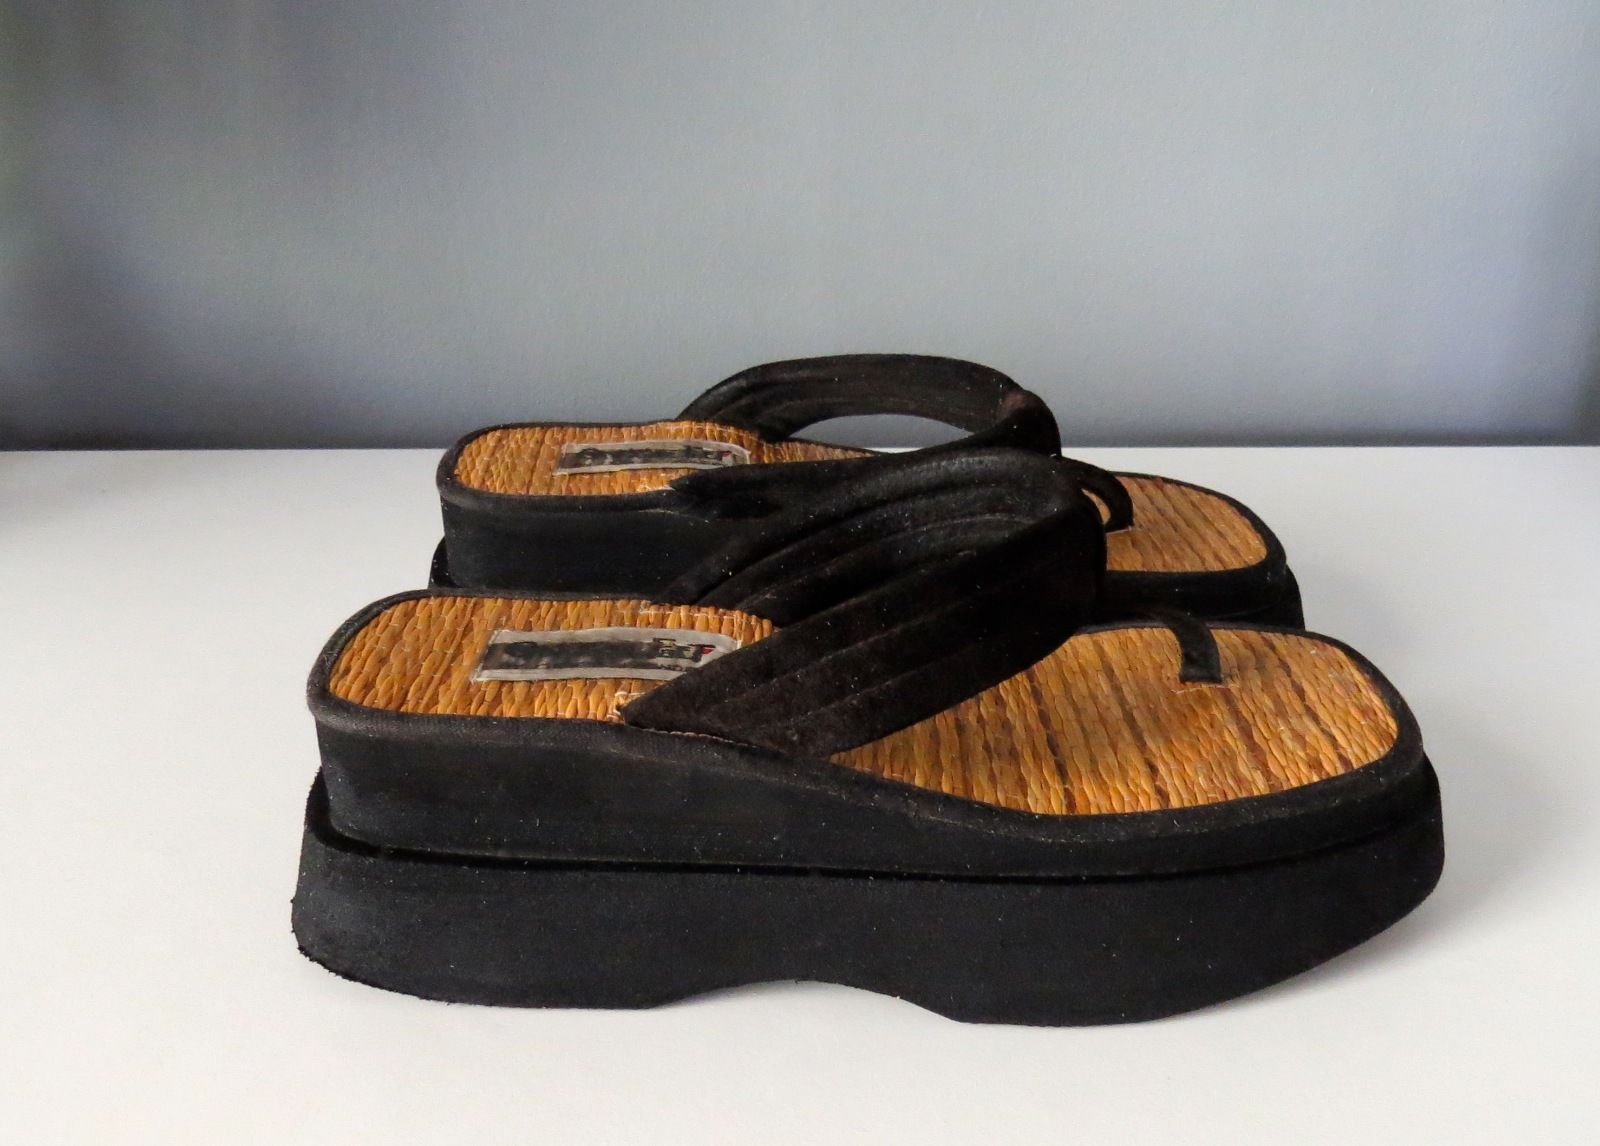 bass sandals from the 90s